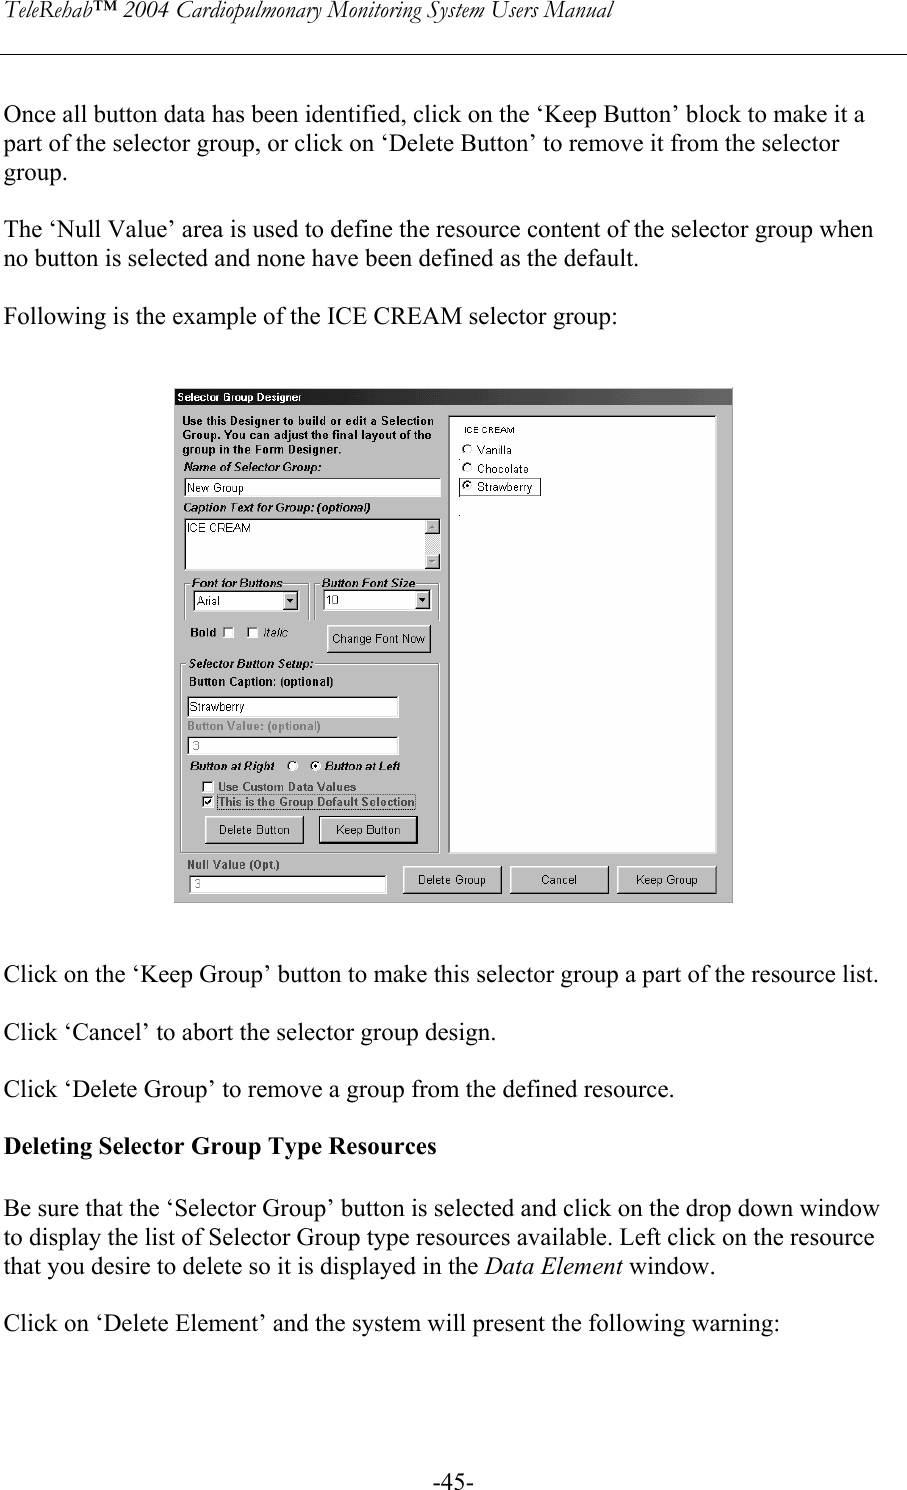 TeleRehab™ 2004 Cardiopulmonary Monitoring System Users Manual    -45- Once all button data has been identified, click on the ‘Keep Button’ block to make it a part of the selector group, or click on ‘Delete Button’ to remove it from the selector group.  The ‘Null Value’ area is used to define the resource content of the selector group when no button is selected and none have been defined as the default.  Following is the example of the ICE CREAM selector group:      Click on the ‘Keep Group’ button to make this selector group a part of the resource list.  Click ‘Cancel’ to abort the selector group design.  Click ‘Delete Group’ to remove a group from the defined resource.  Deleting Selector Group Type Resources  Be sure that the ‘Selector Group’ button is selected and click on the drop down window to display the list of Selector Group type resources available. Left click on the resource that you desire to delete so it is displayed in the Data Element window.    Click on ‘Delete Element’ and the system will present the following warning:  